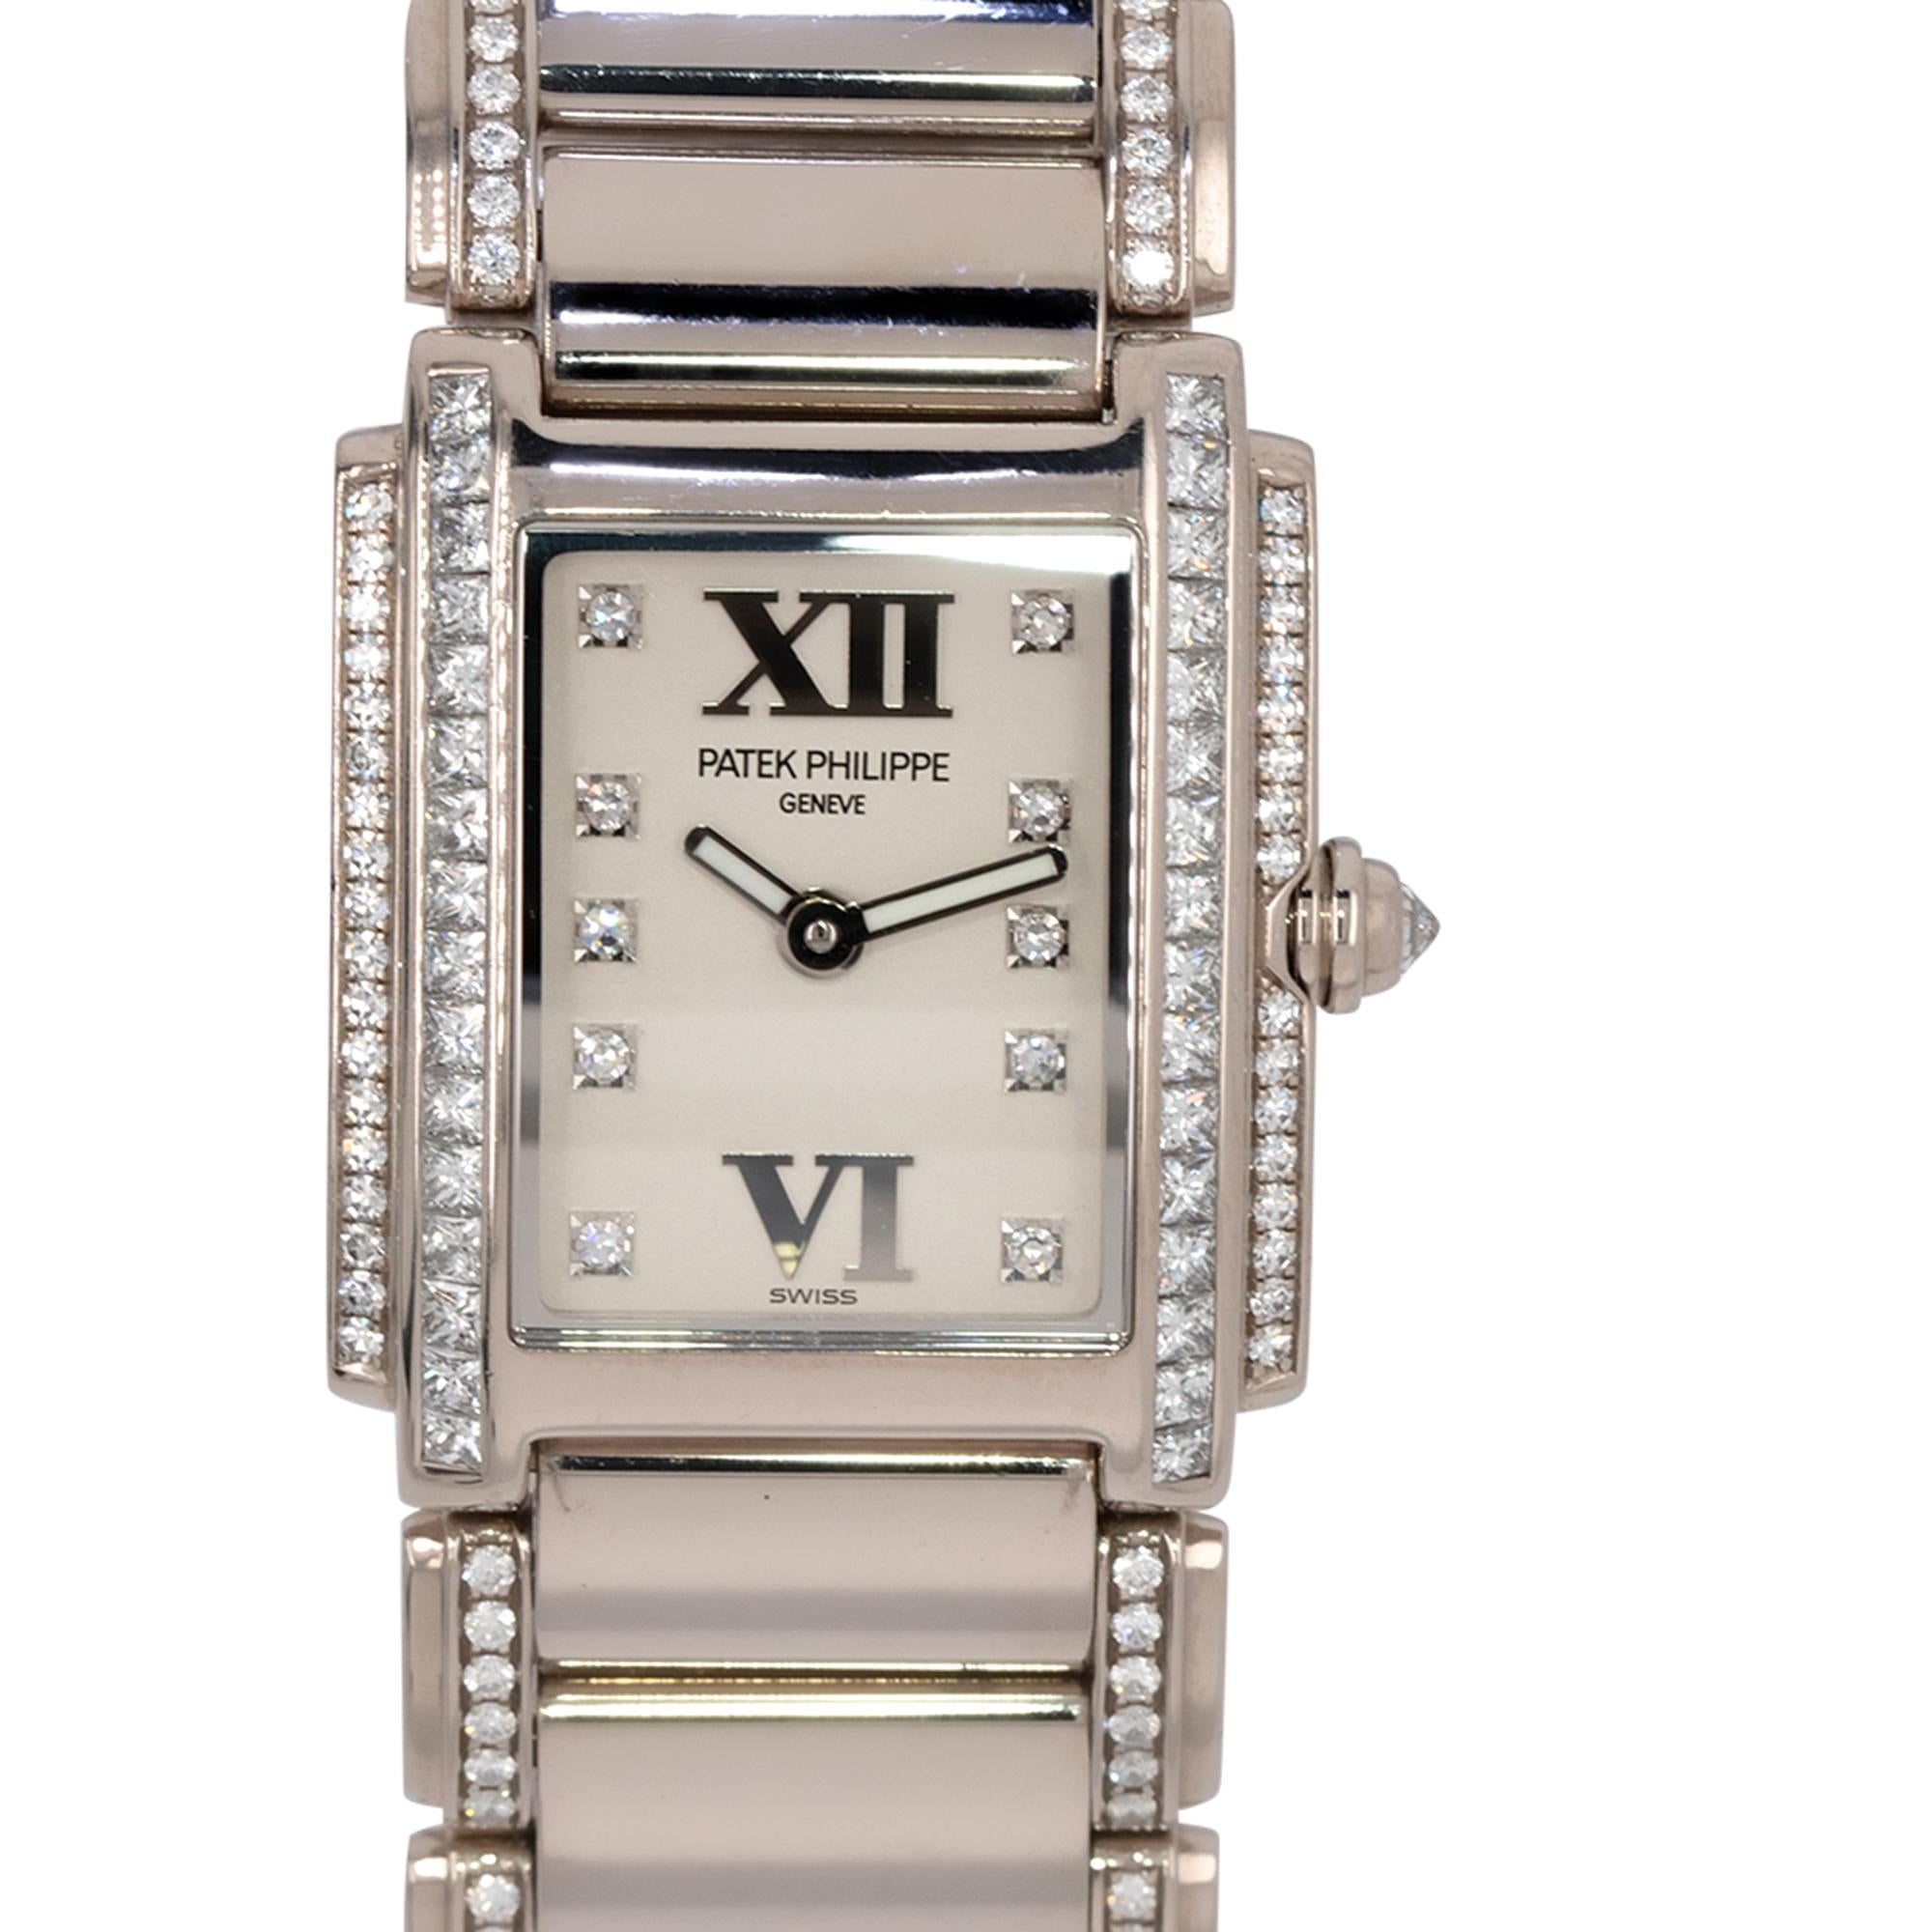 Patek Philippe 4908/31G Twenty-4 White Gold Diamond Ladies Watch

Embrace timeless elegance with the Patek Philippe 4908/31G Twenty-4 watch, a masterpiece of luxury and sophistication. This exquisite timepiece is meticulously crafted with a